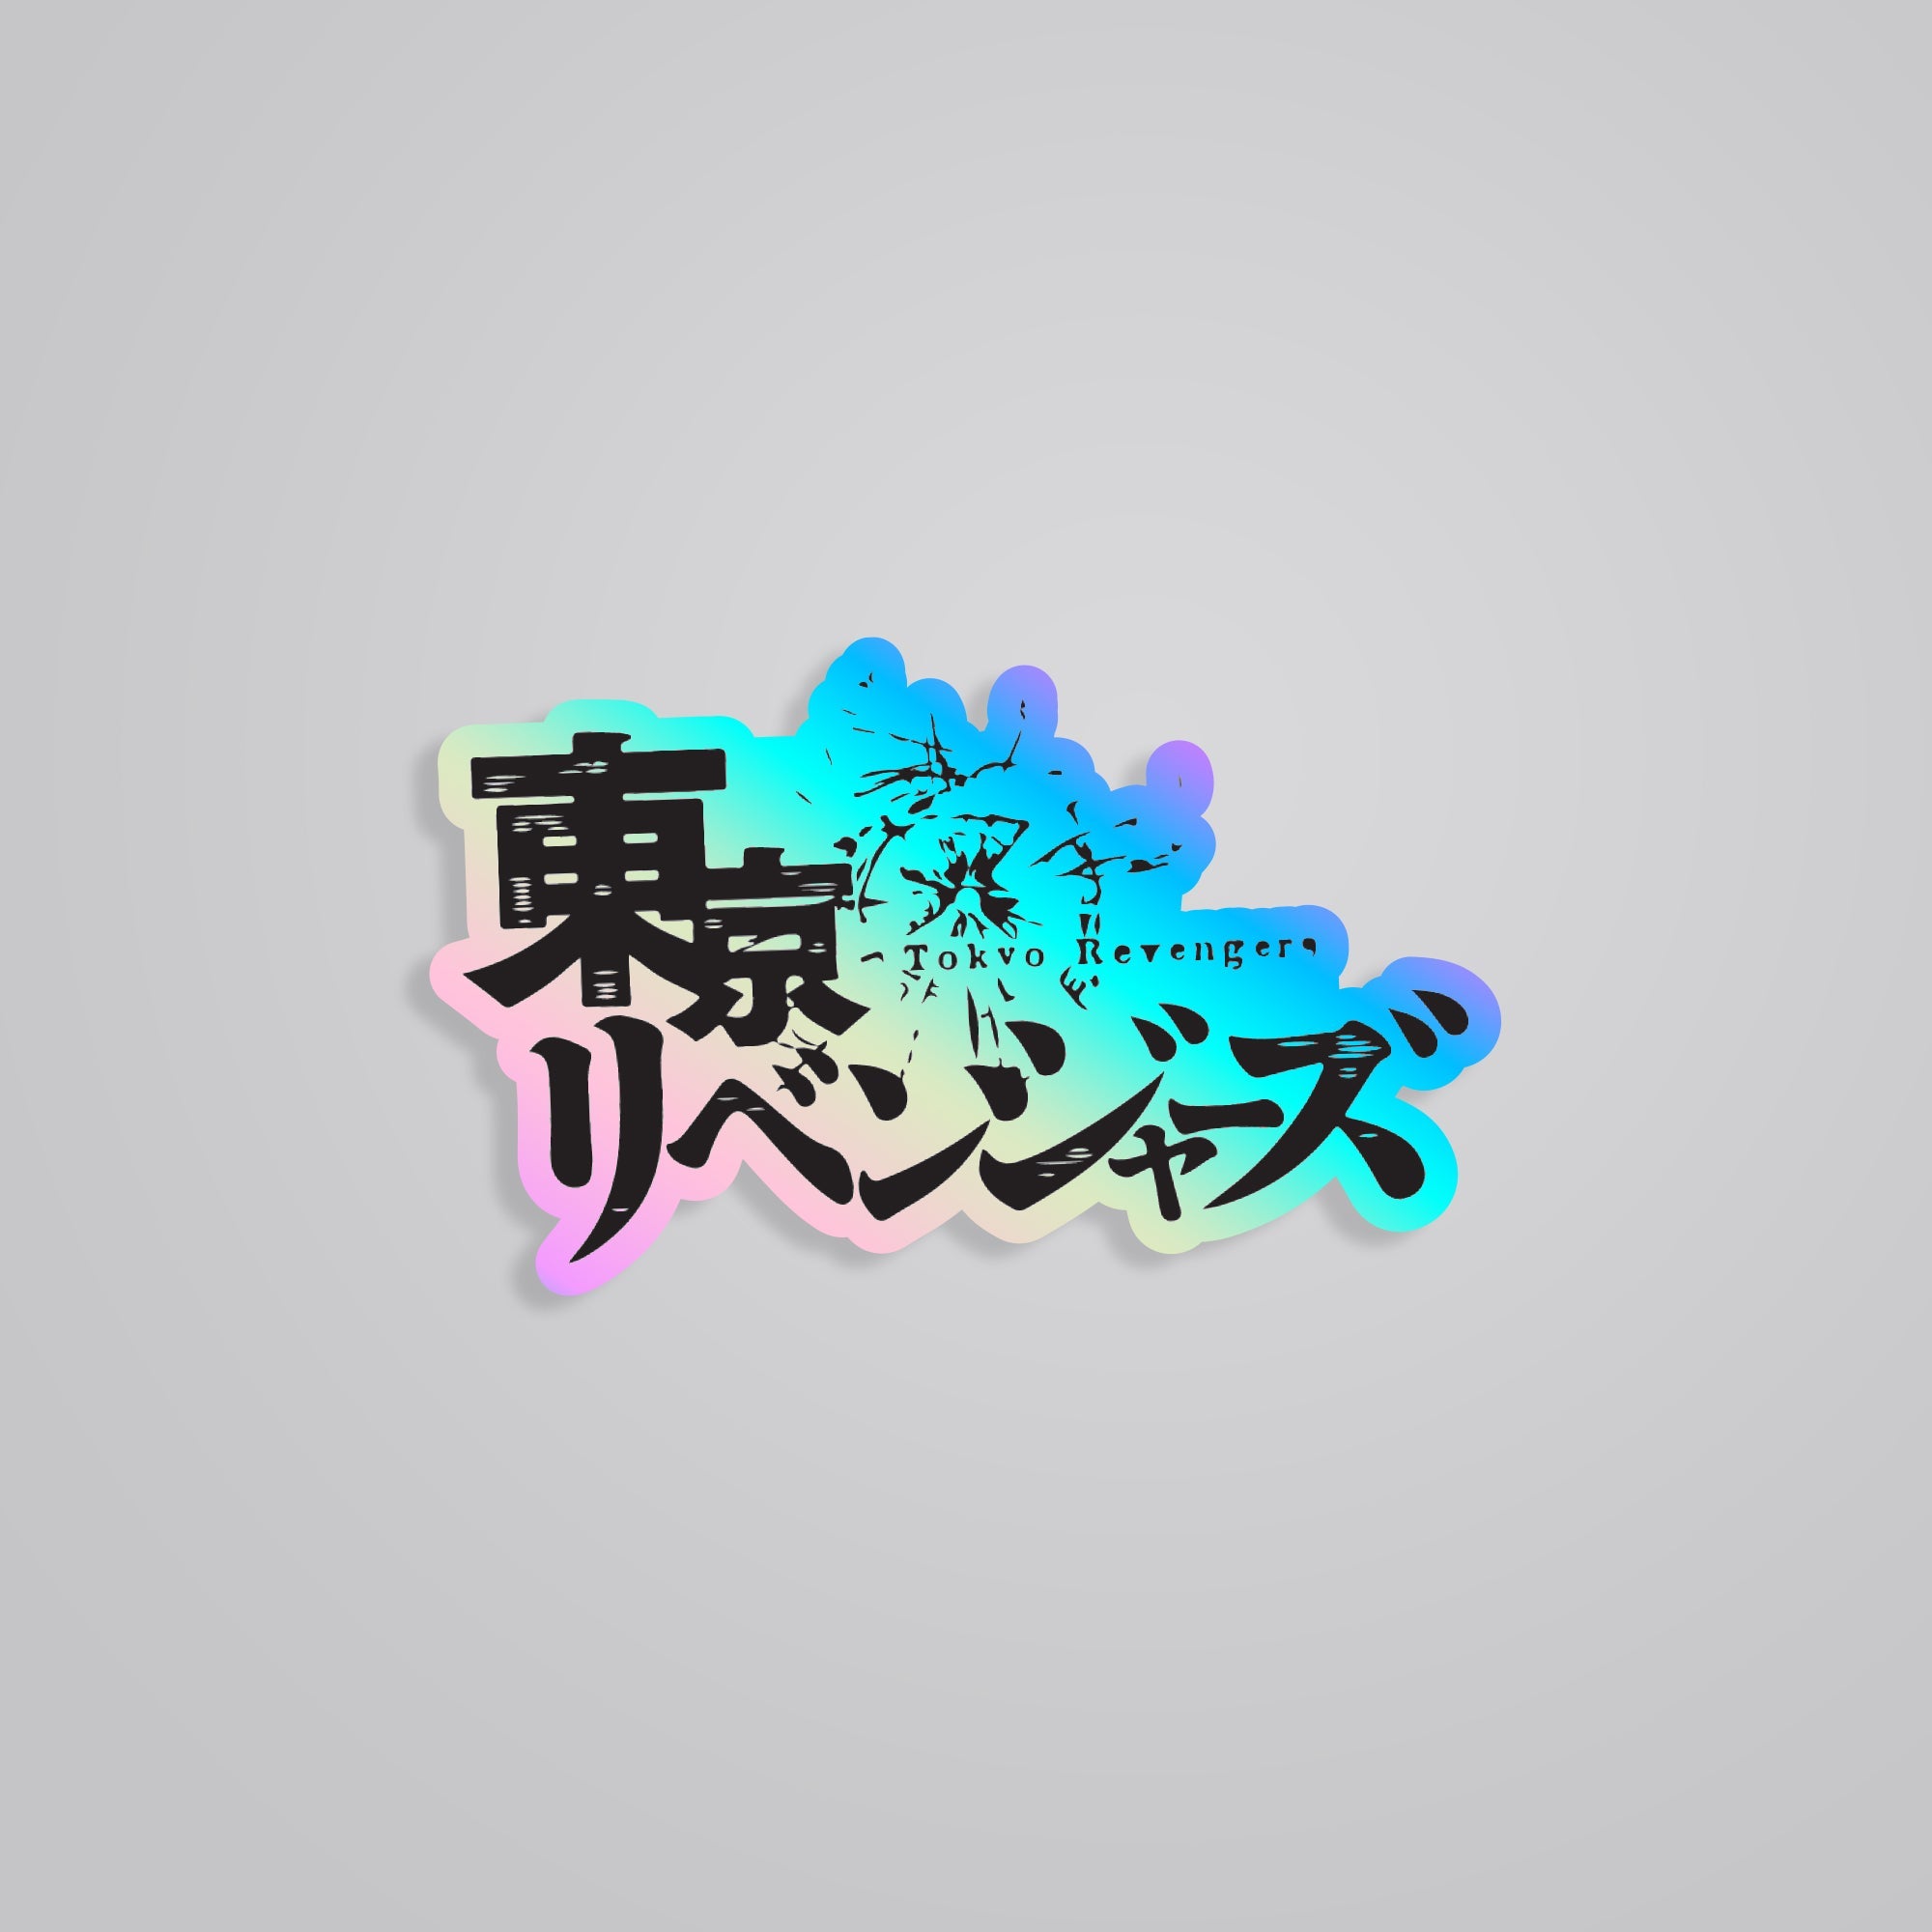 Fomo Store Holographic Stickers Anime Tokyo Revengers